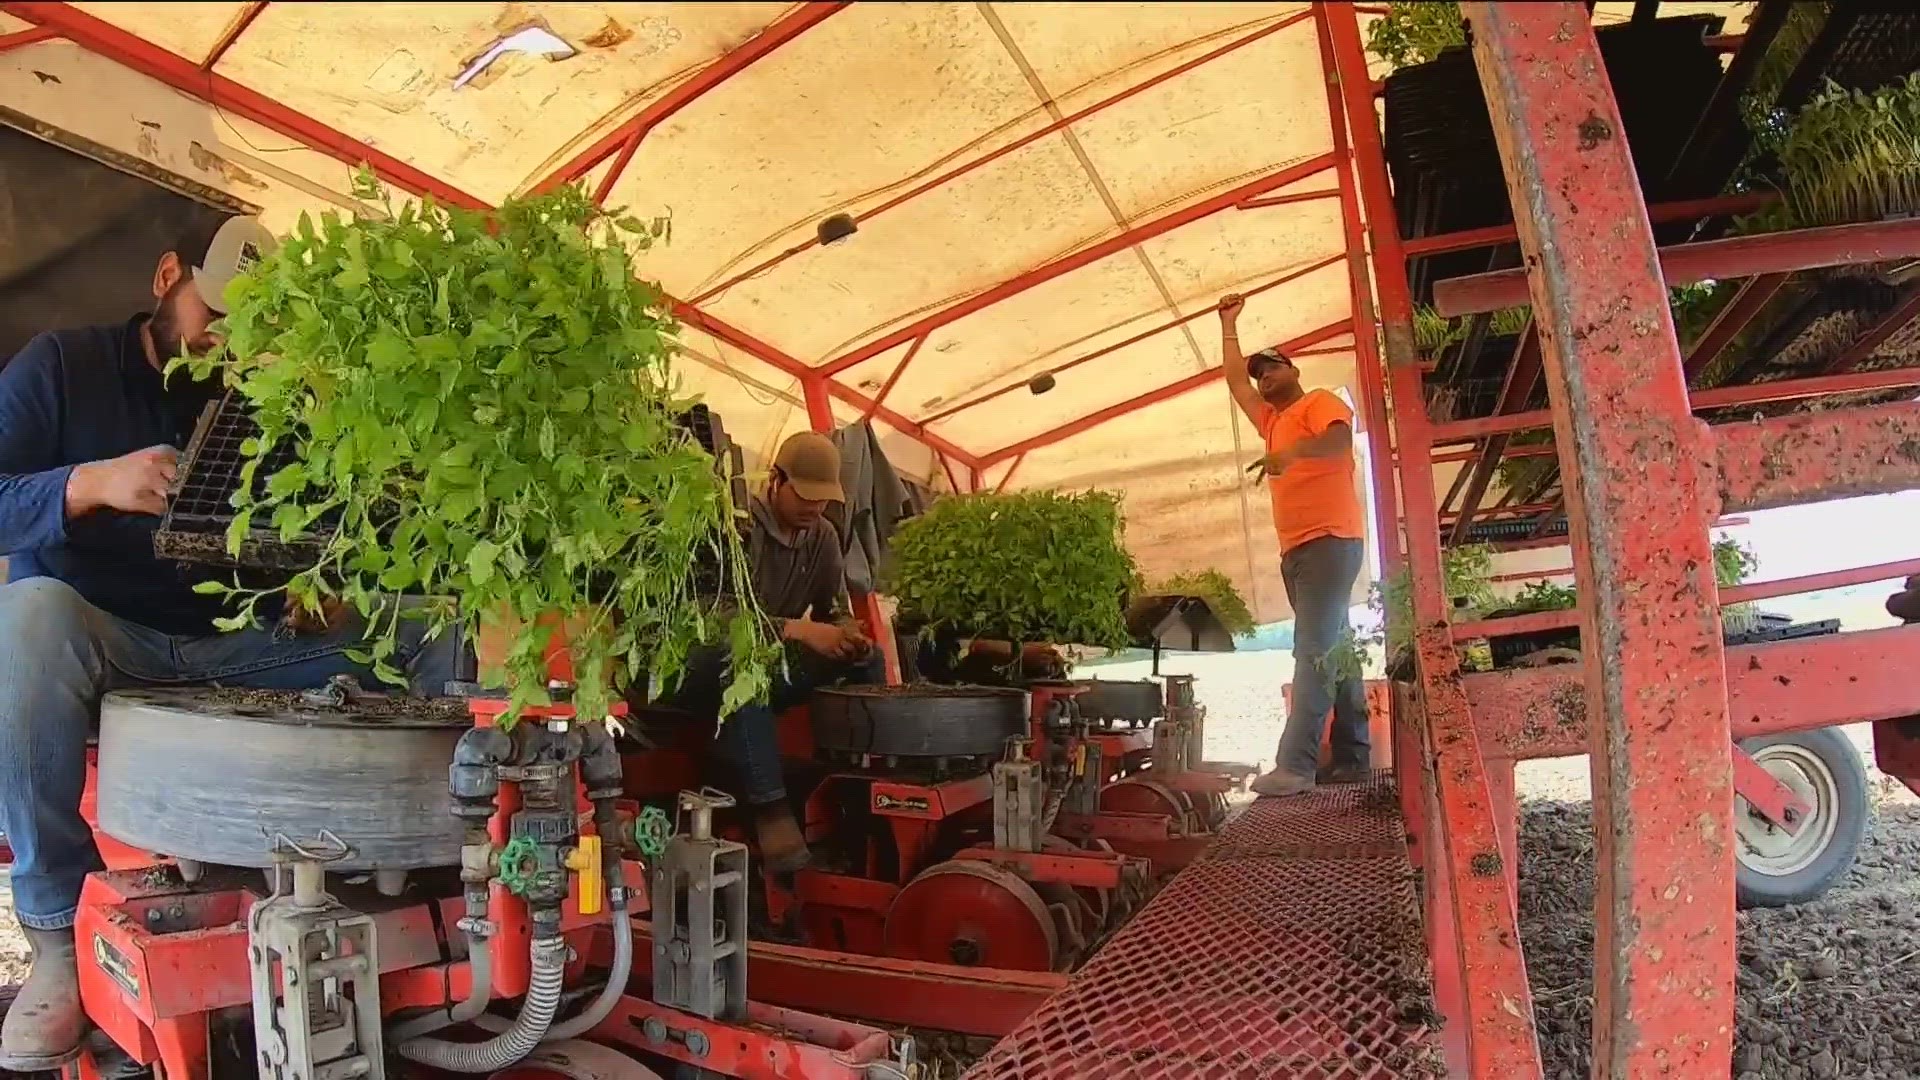 It's been a dry spring, but area farmers have taken advantage by getting their crops planted. Dan Cummins has the story of a 5th generation farmer in Fulton County.